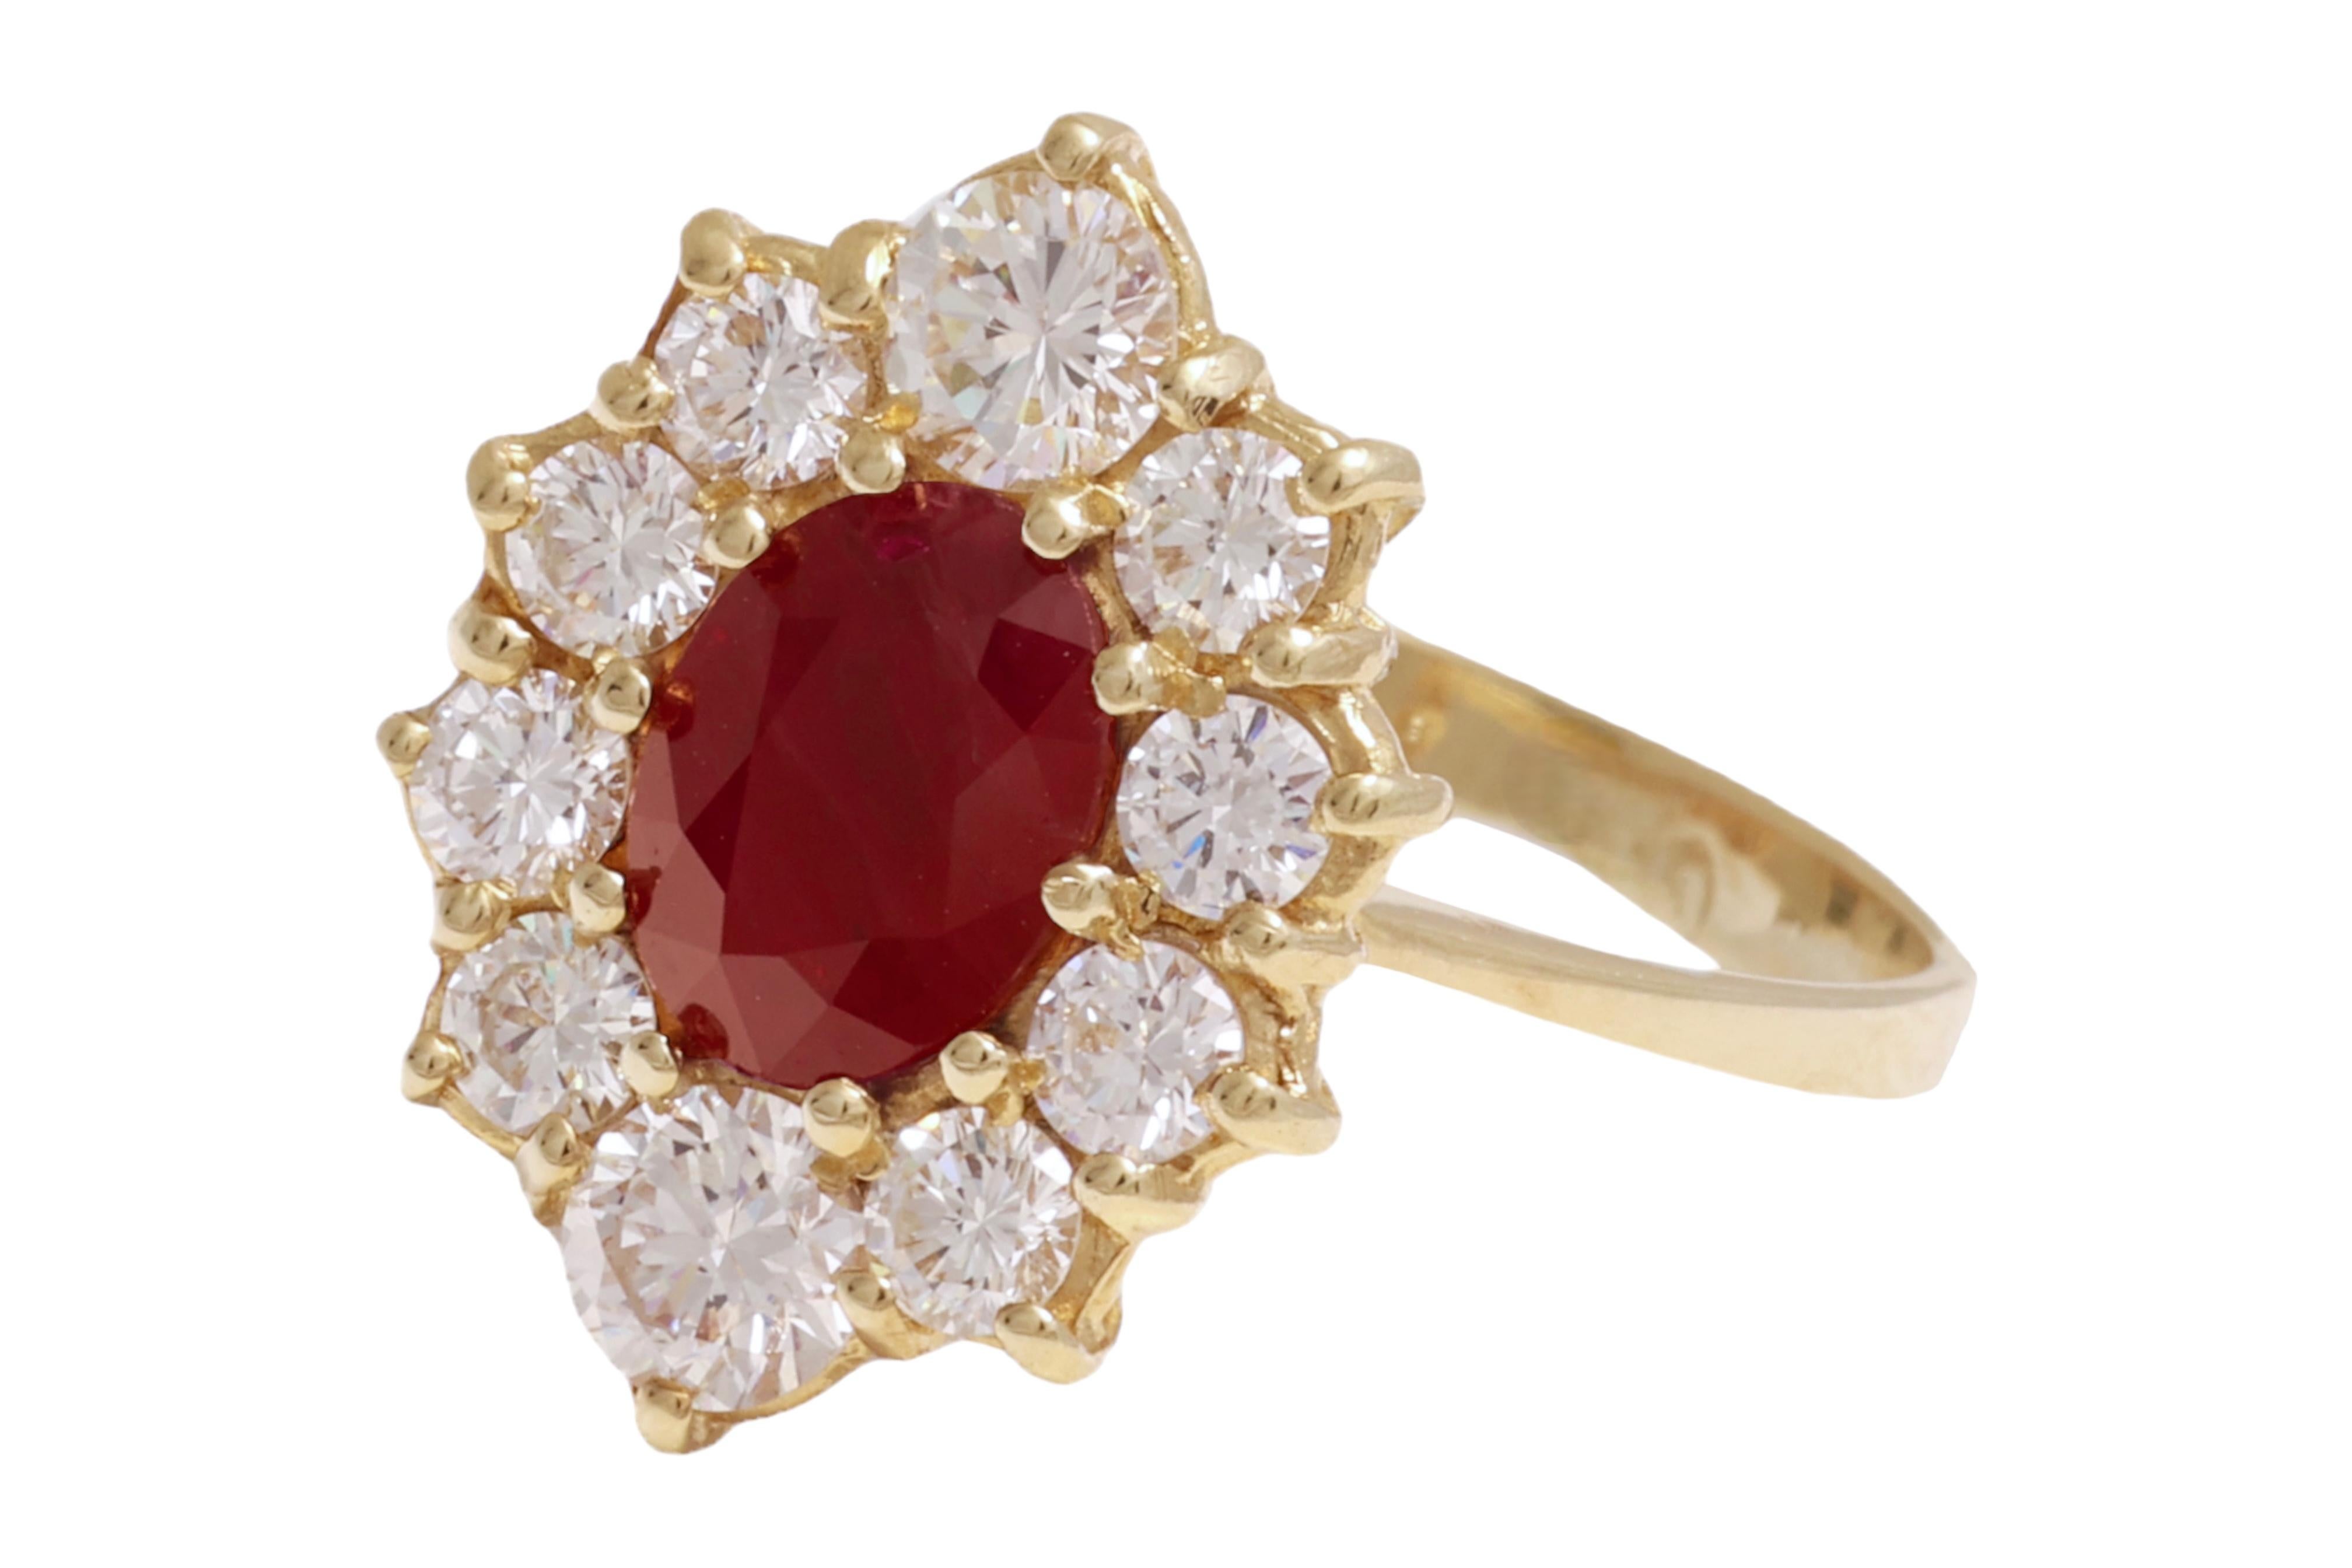 Brilliant Cut 18 Karat Yellow Gold 1.71 Carat Ruby Ring with Diamonds For Sale